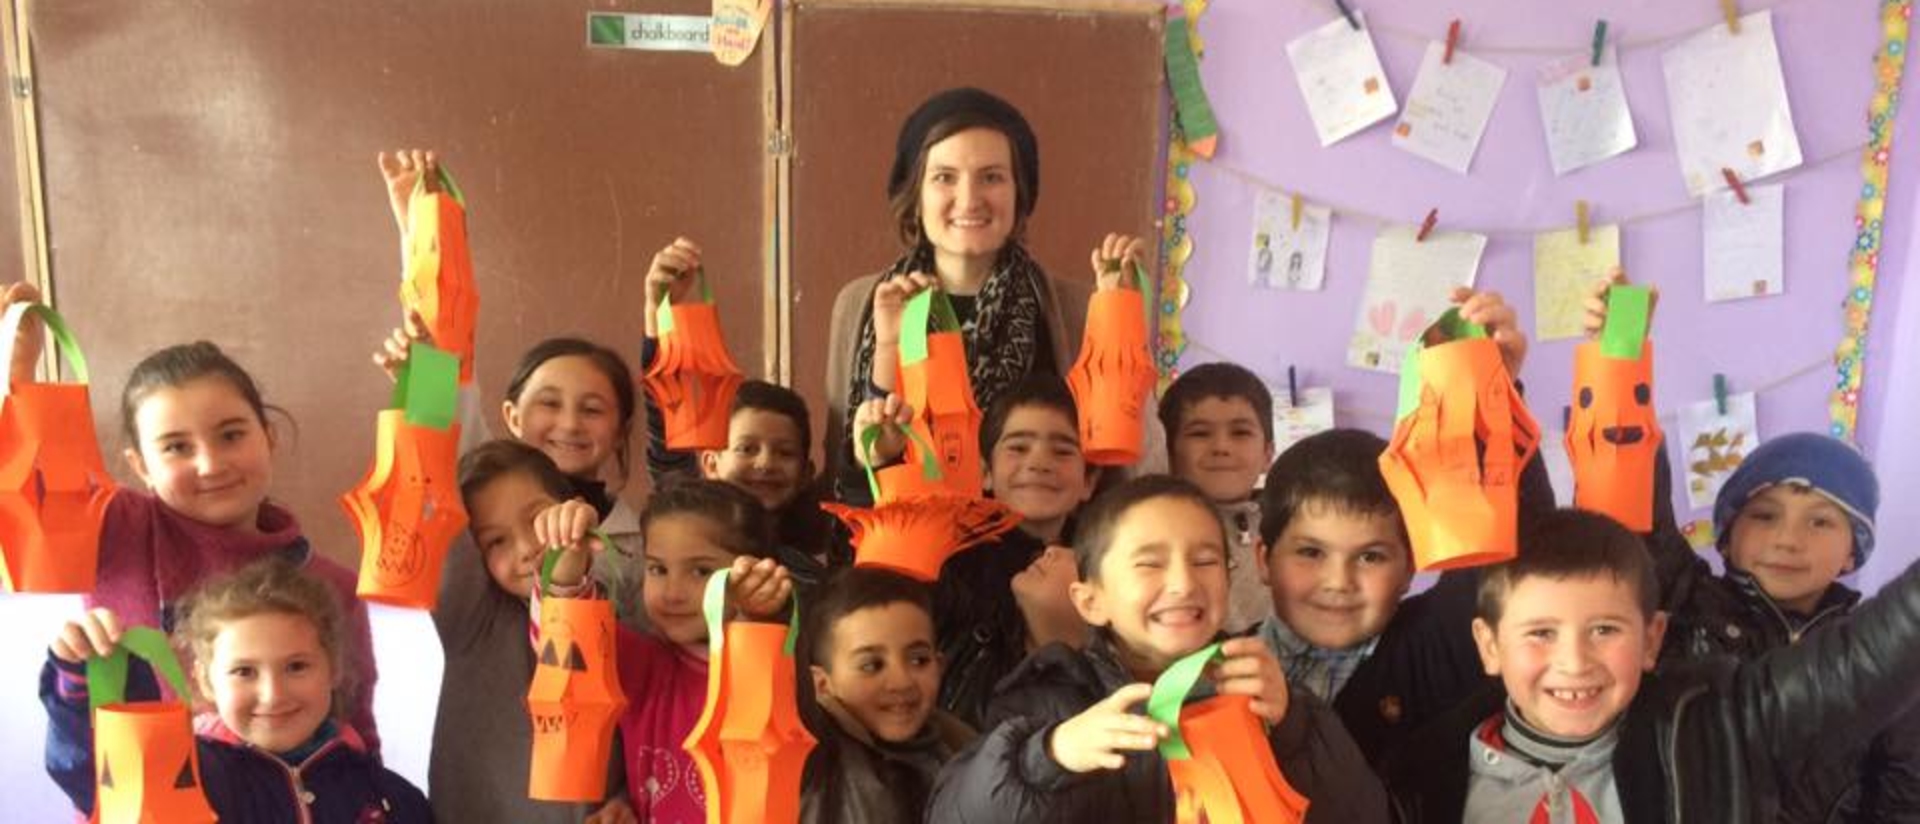 Courtney Ostert celebrating Halloween with students in the Republic of Georgia. 